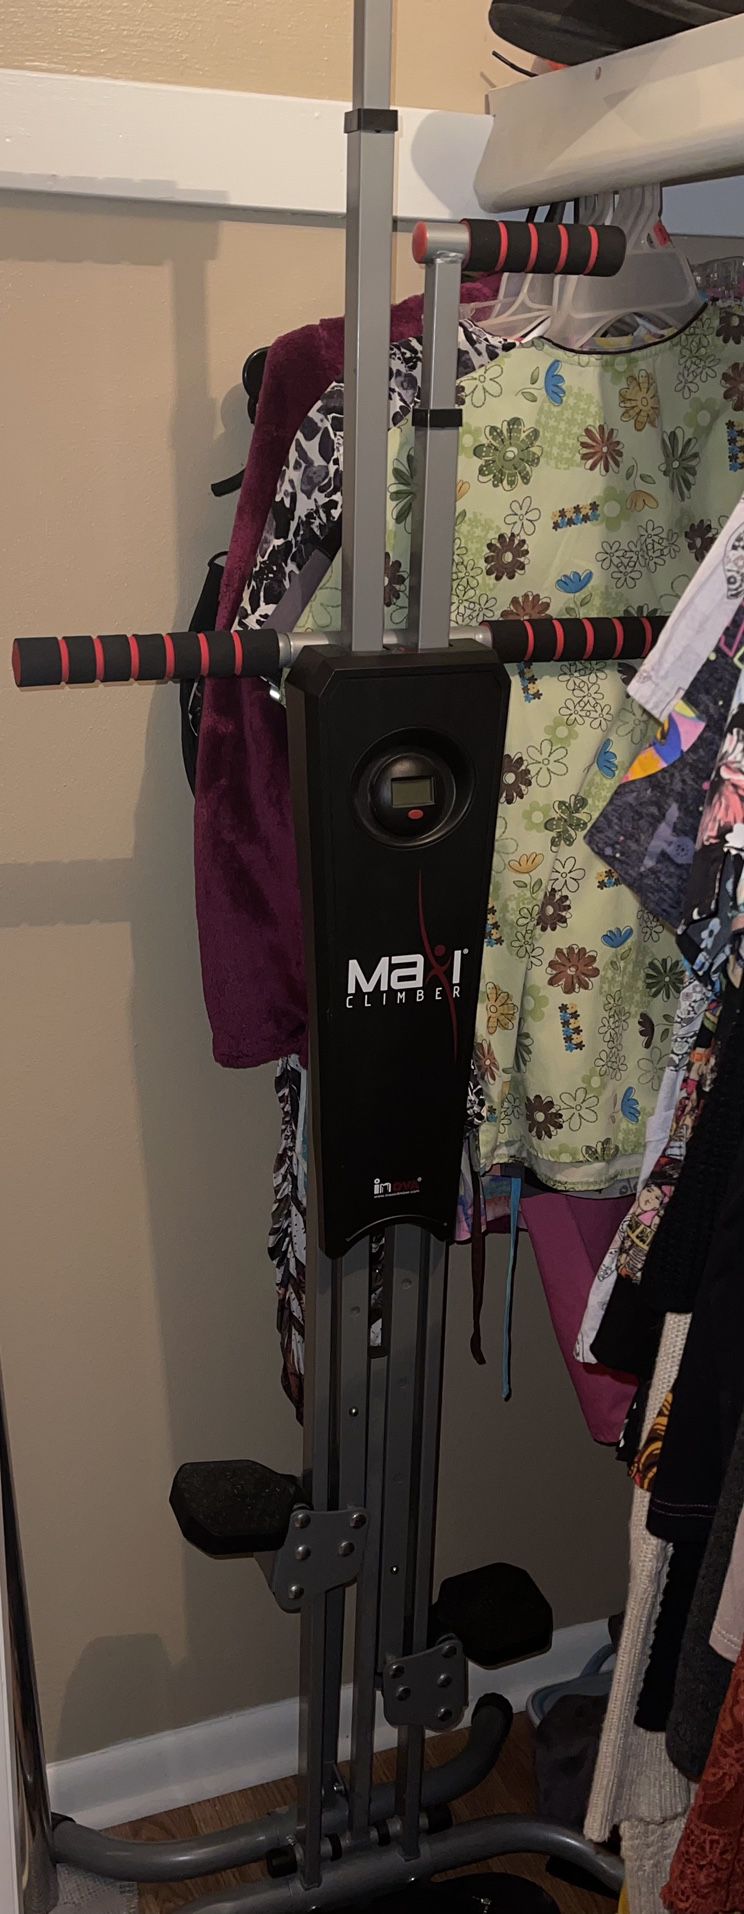 Maxiclimber Exercise Equipment For Sale (Like New)